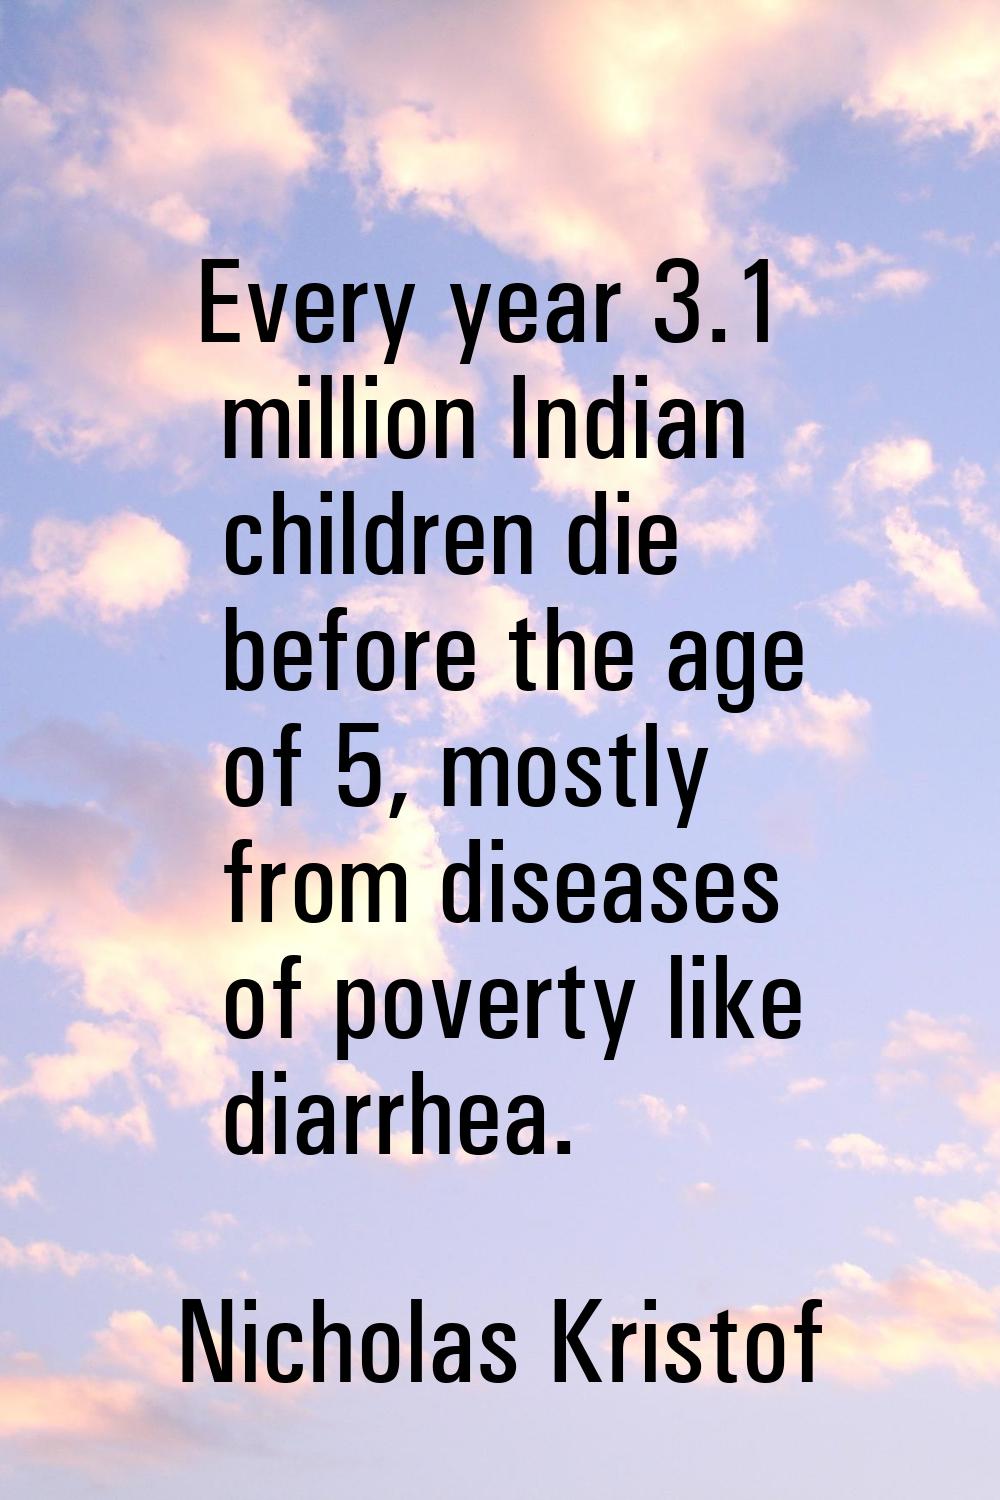 Every year 3.1 million Indian children die before the age of 5, mostly from diseases of poverty lik